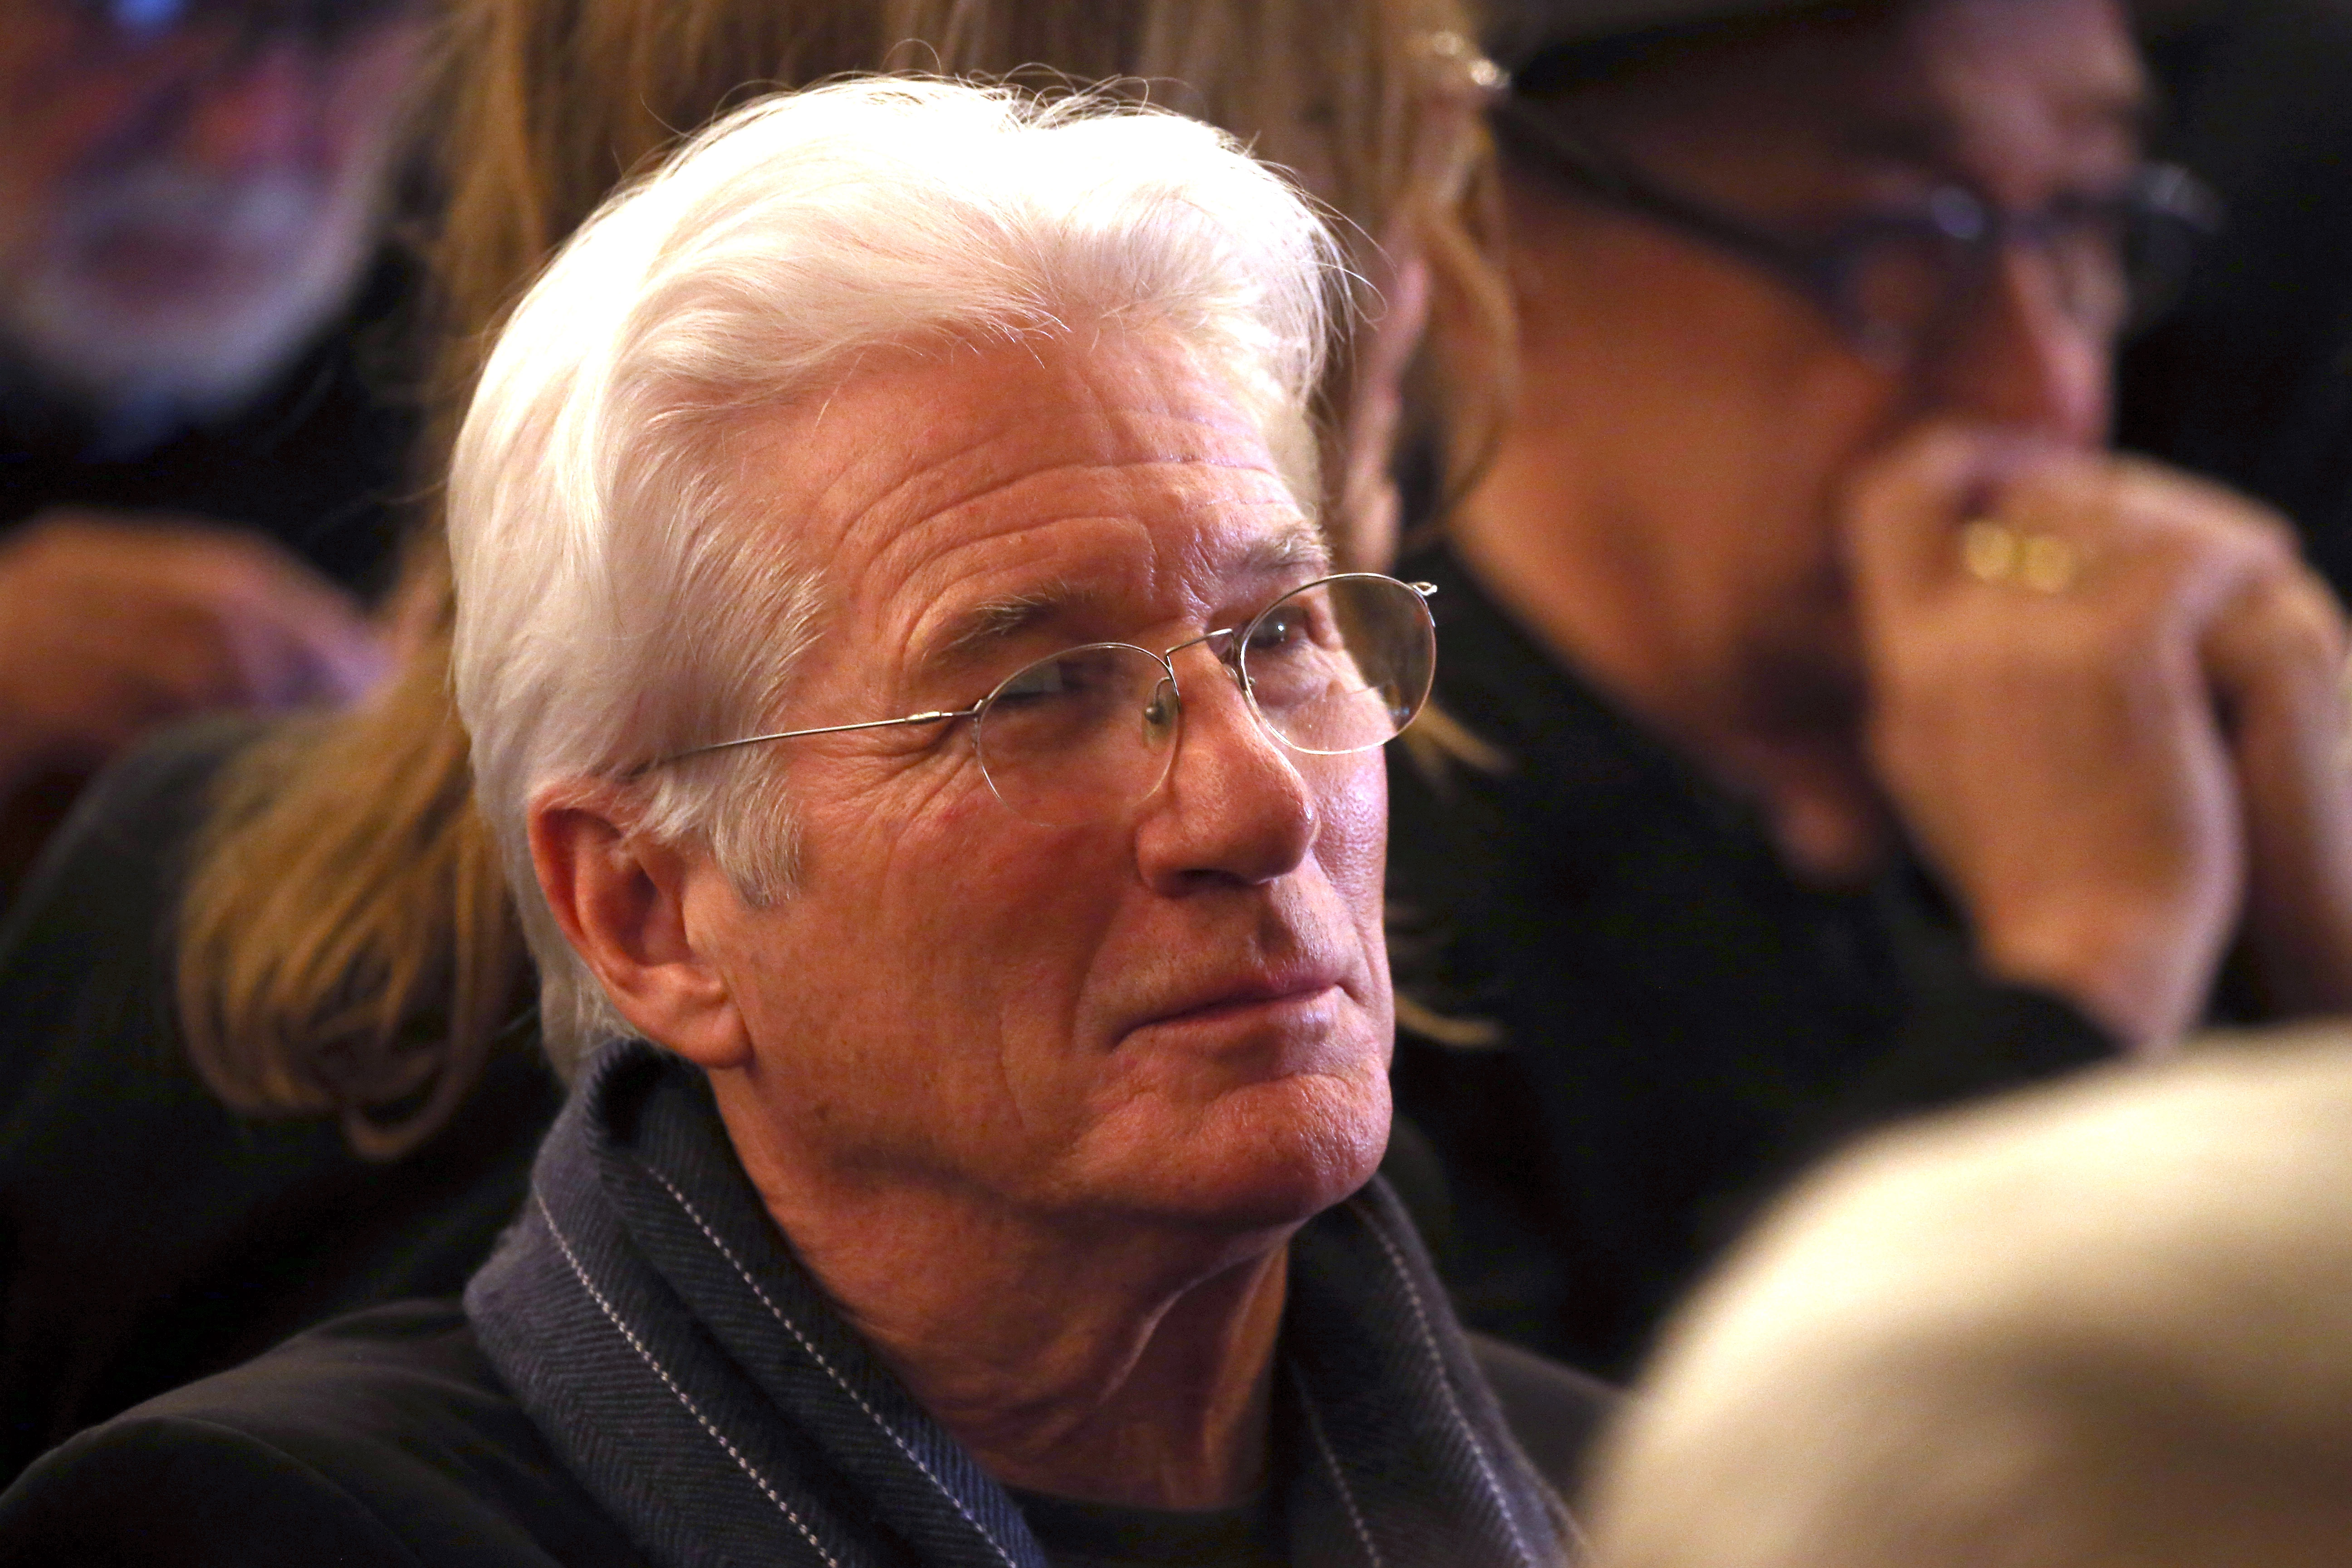 Richard Gere attends Bernardo Bertolucci Memorial at Teatro Argentina on December 6, 2018 in Rome, Italy | Source: Getty Images